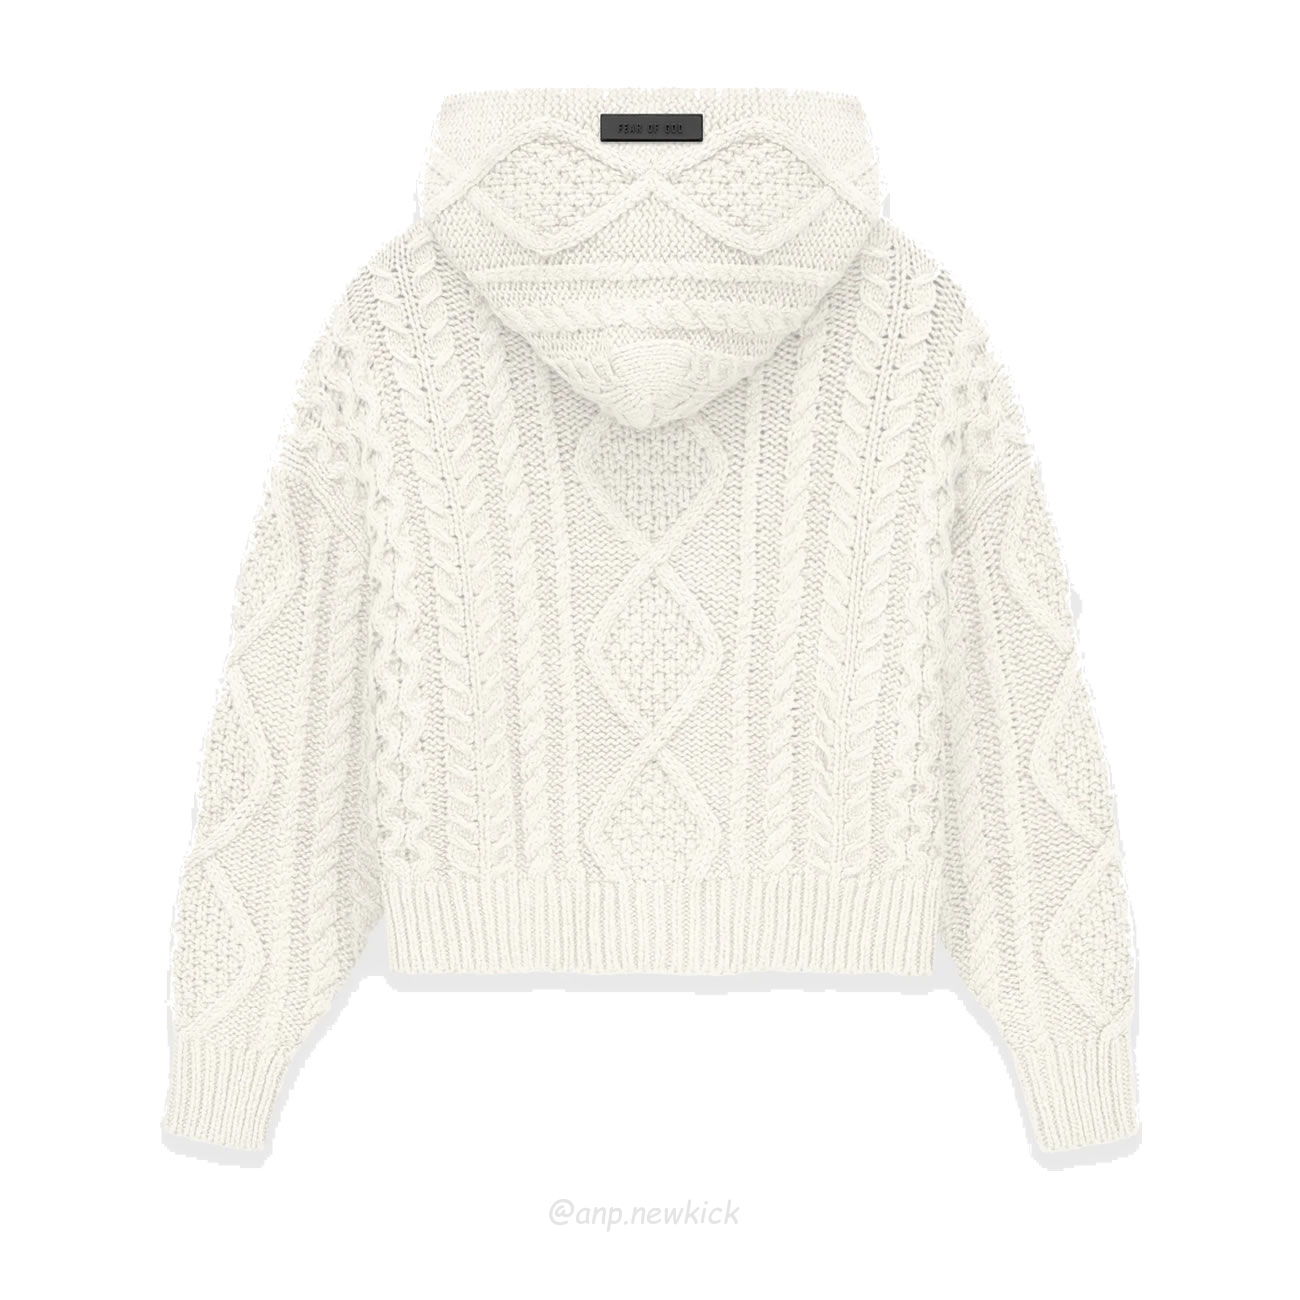 Fear Of God Essentials Fog 23fw New Collection Of Hooded Sweaters In Black Elephant White Beige White S Xl (2) - newkick.org